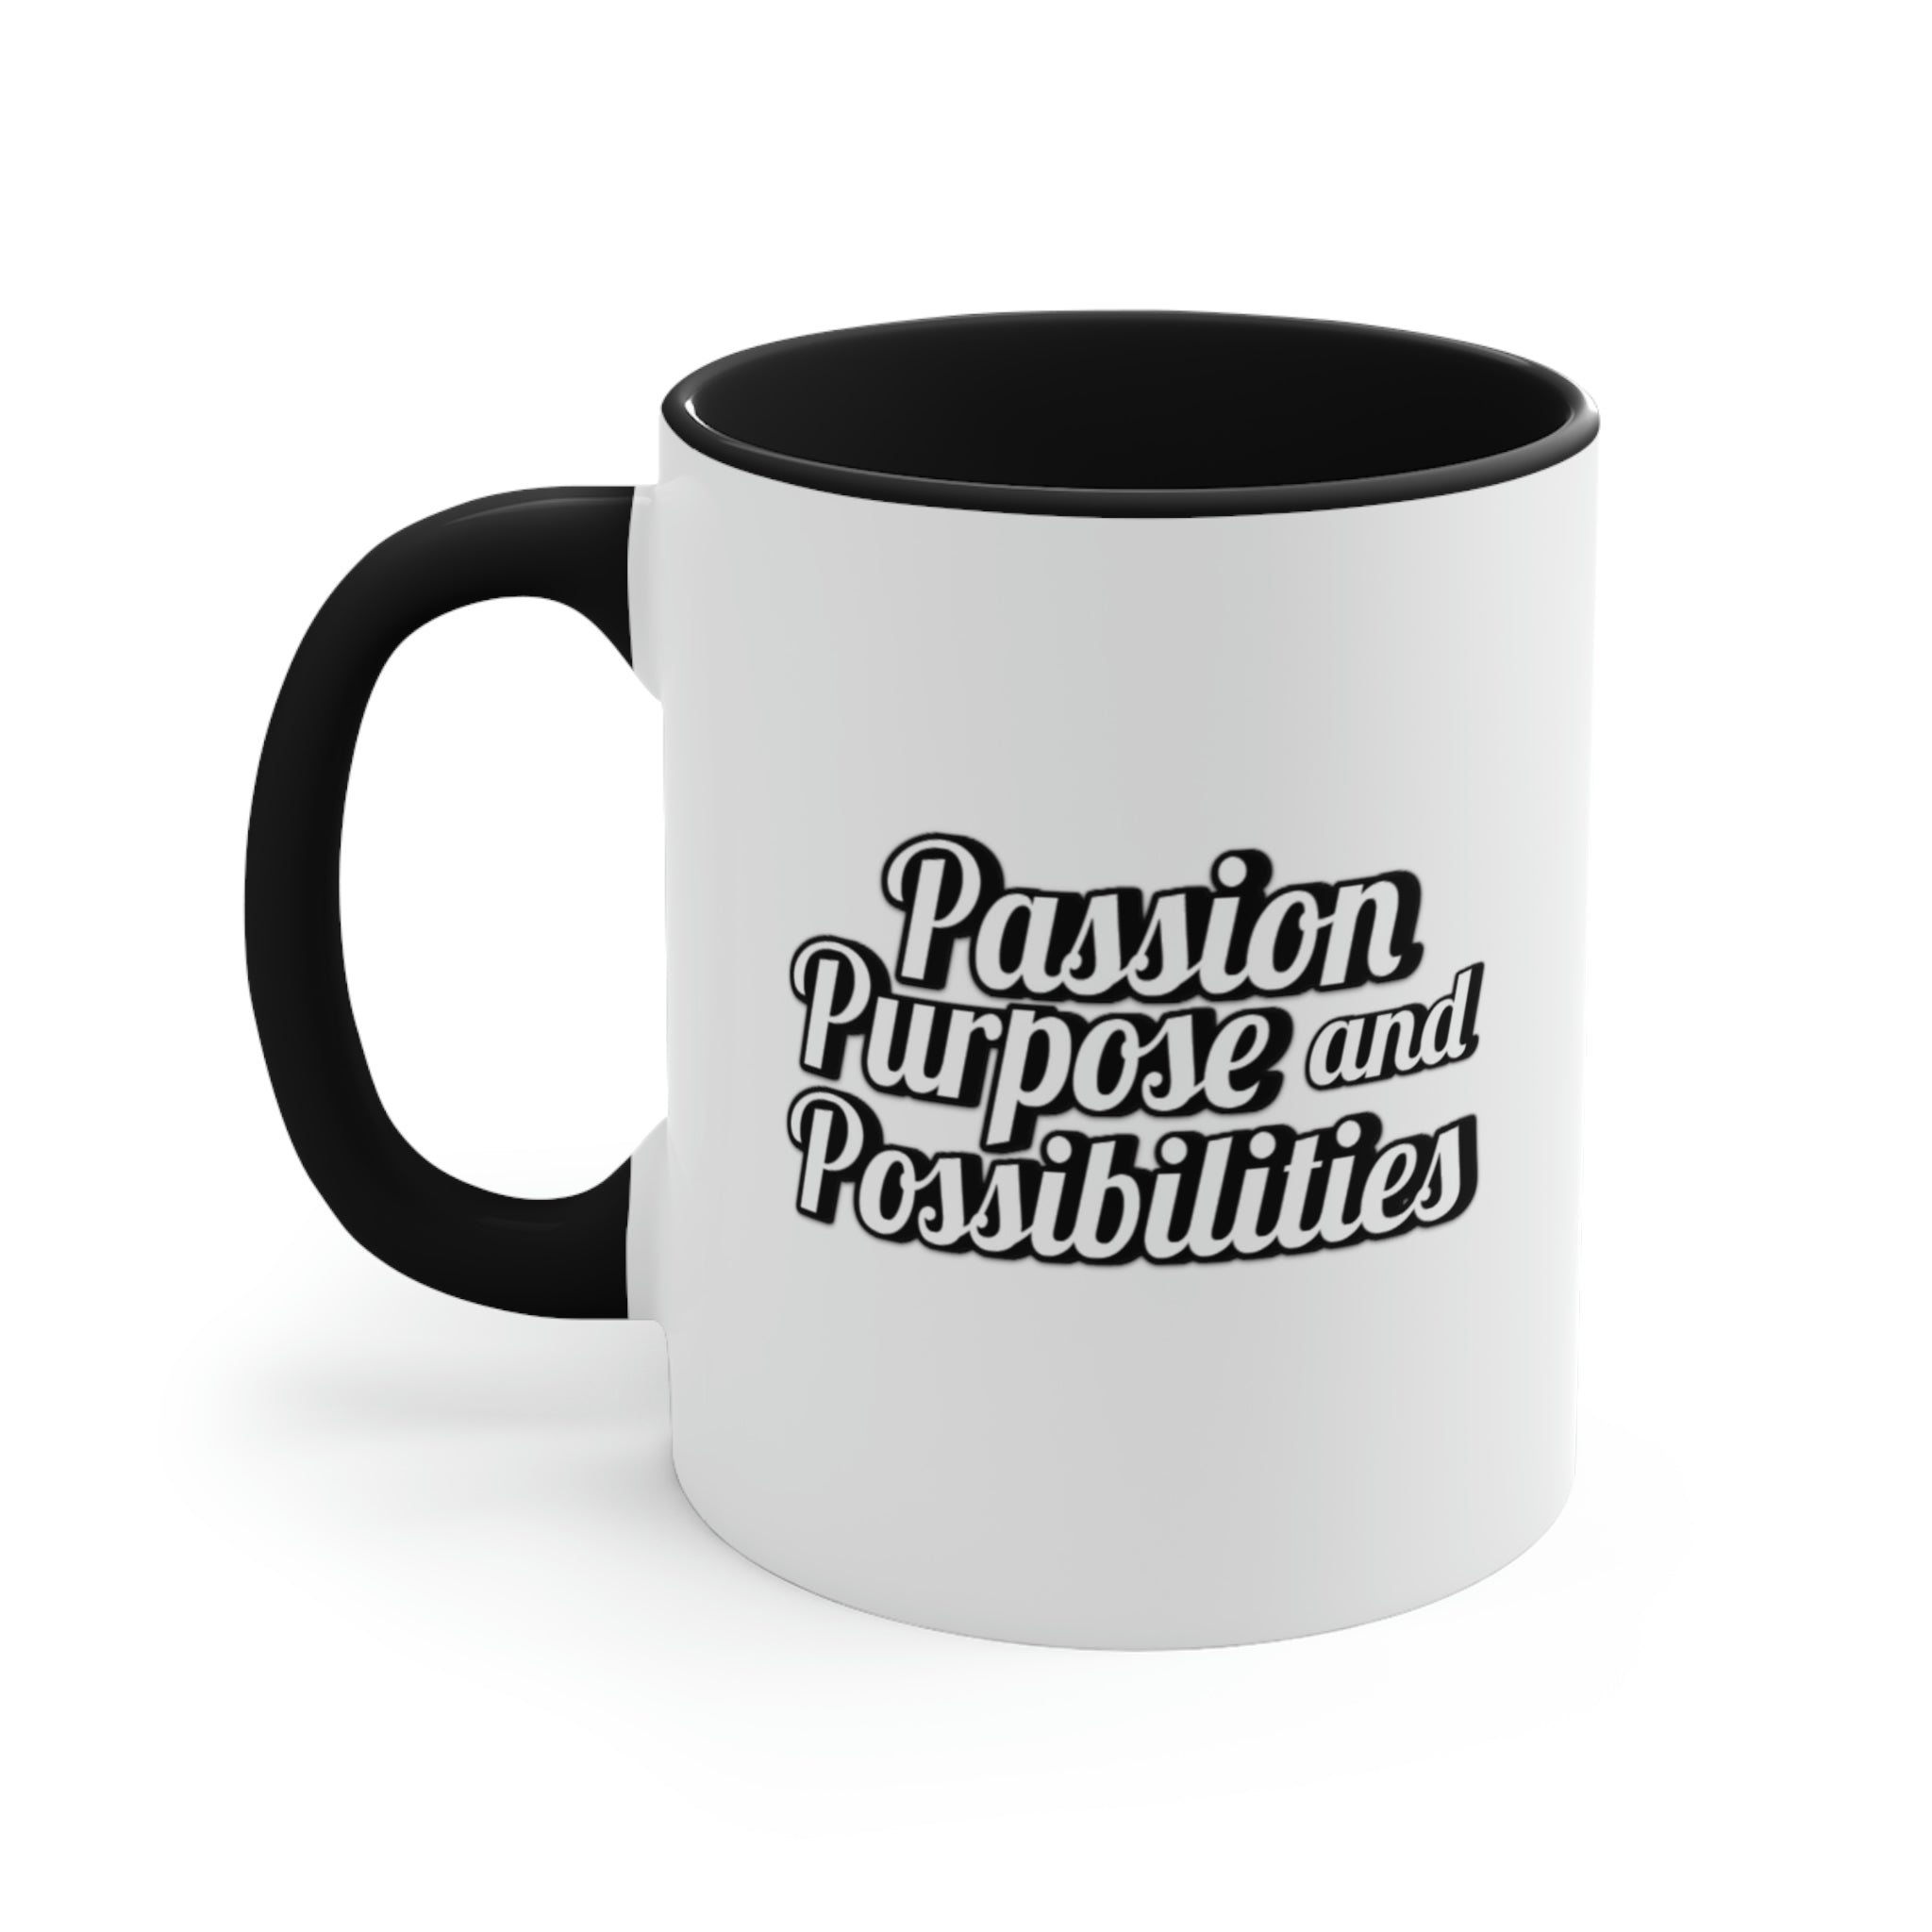 Passion Purpose and Possibilities Accent 11oz Coffee Mug - The Kindness Cause